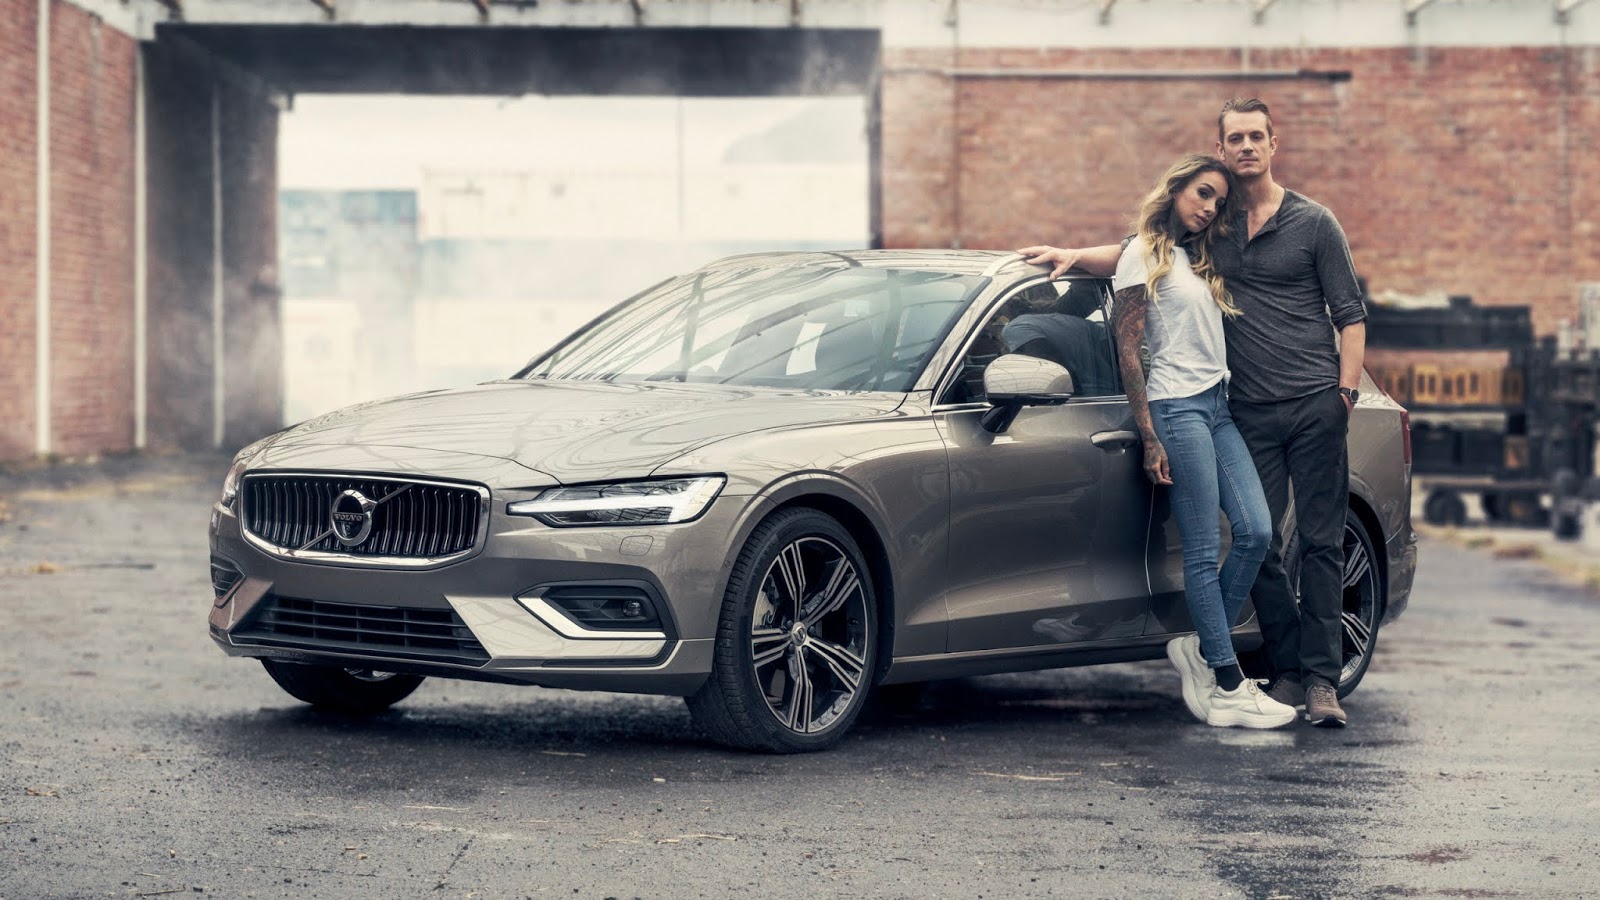 Volvo S New V60 Campaign Highlights Emotional Family Situations In Series Of Short Films Adstasher